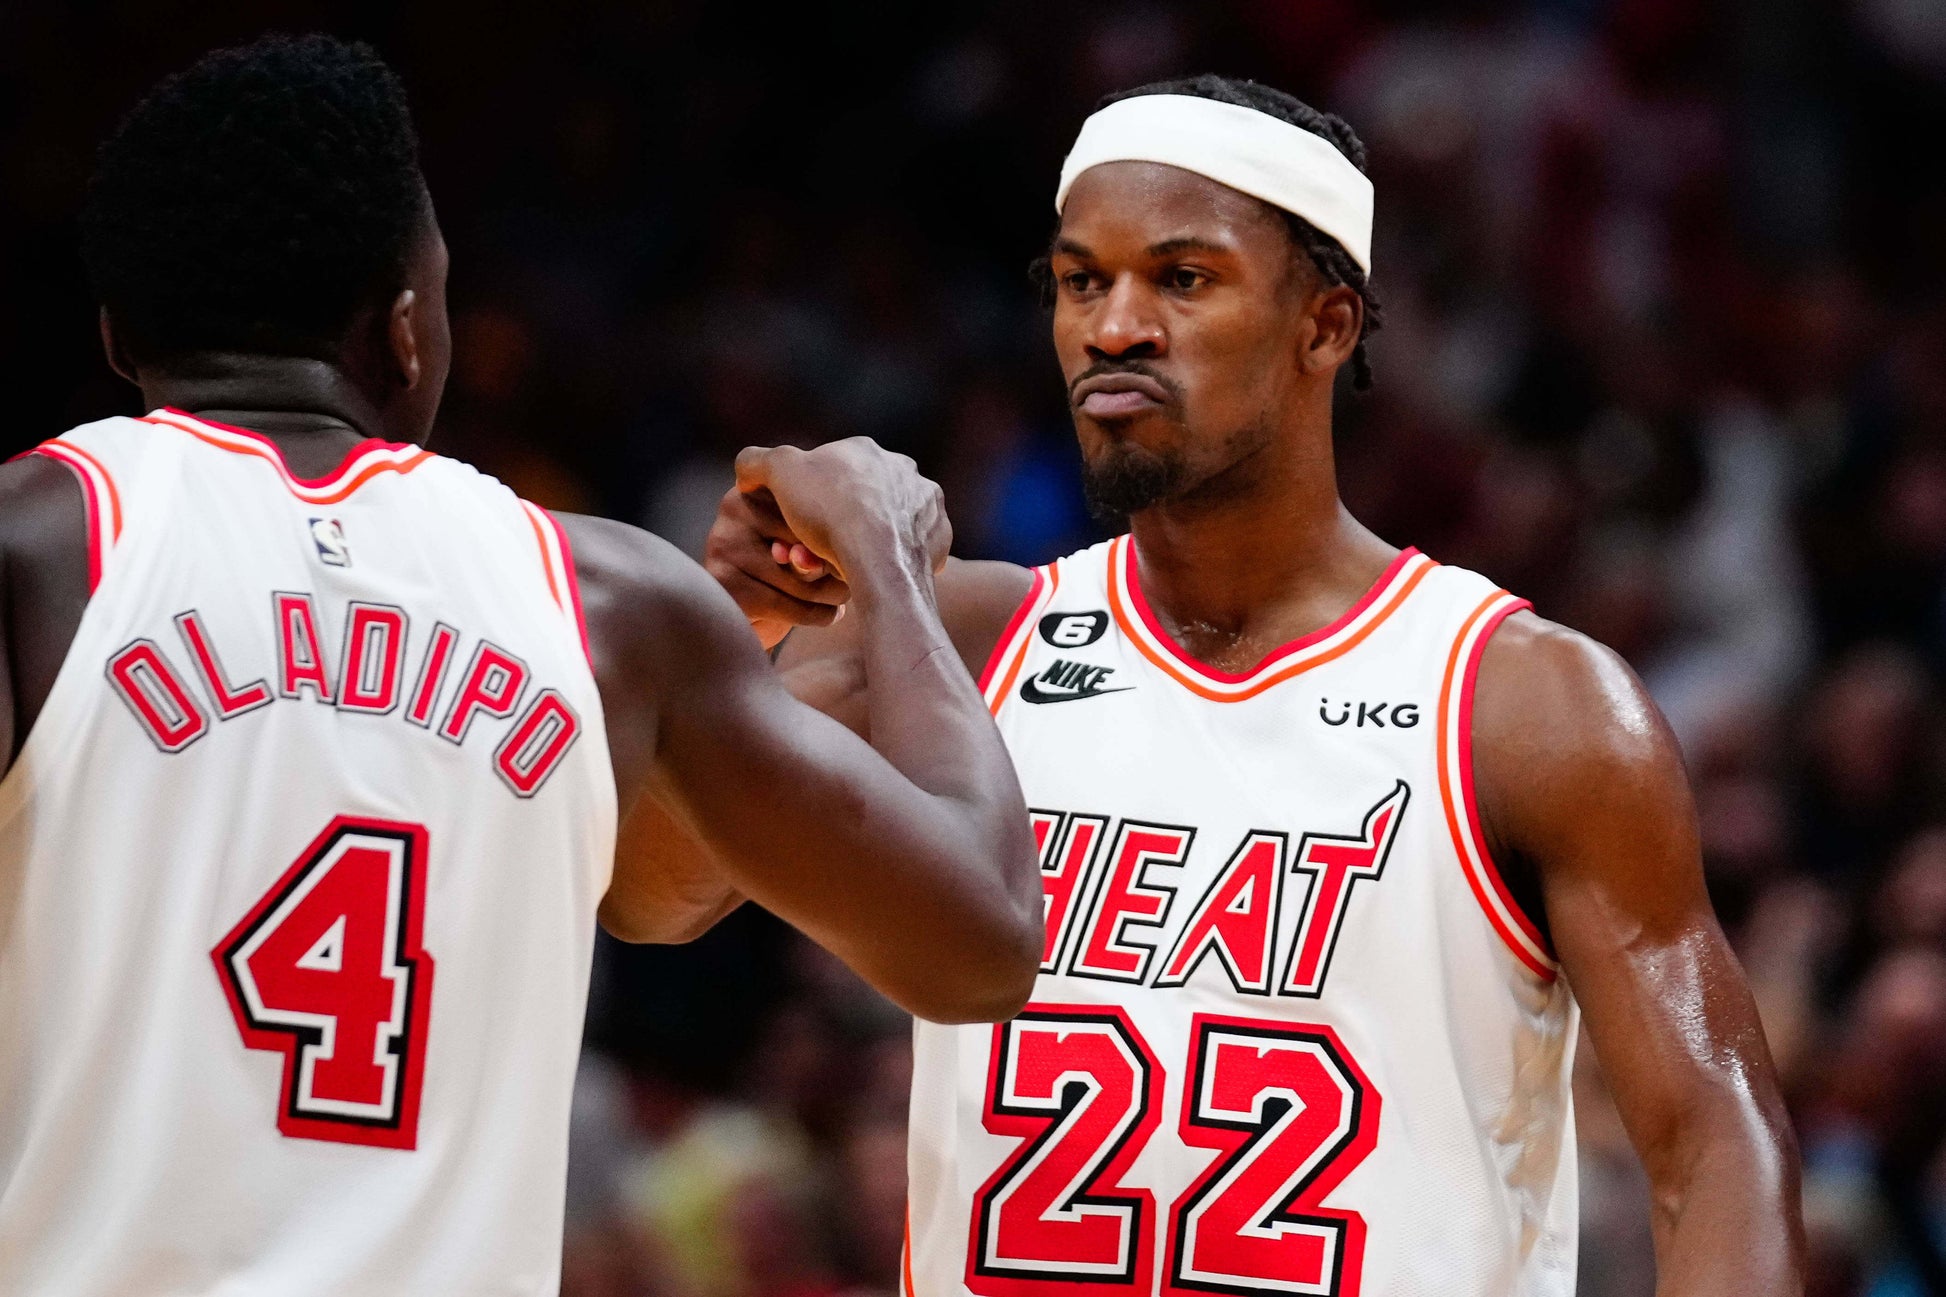 Jimmy Butler - Miami Heat - Game-Worn City Edition Jersey - 3000th Game in  Heat History - 1st Half - Recorded a 35-Point Double-Double - 2022-23 NBA  Season